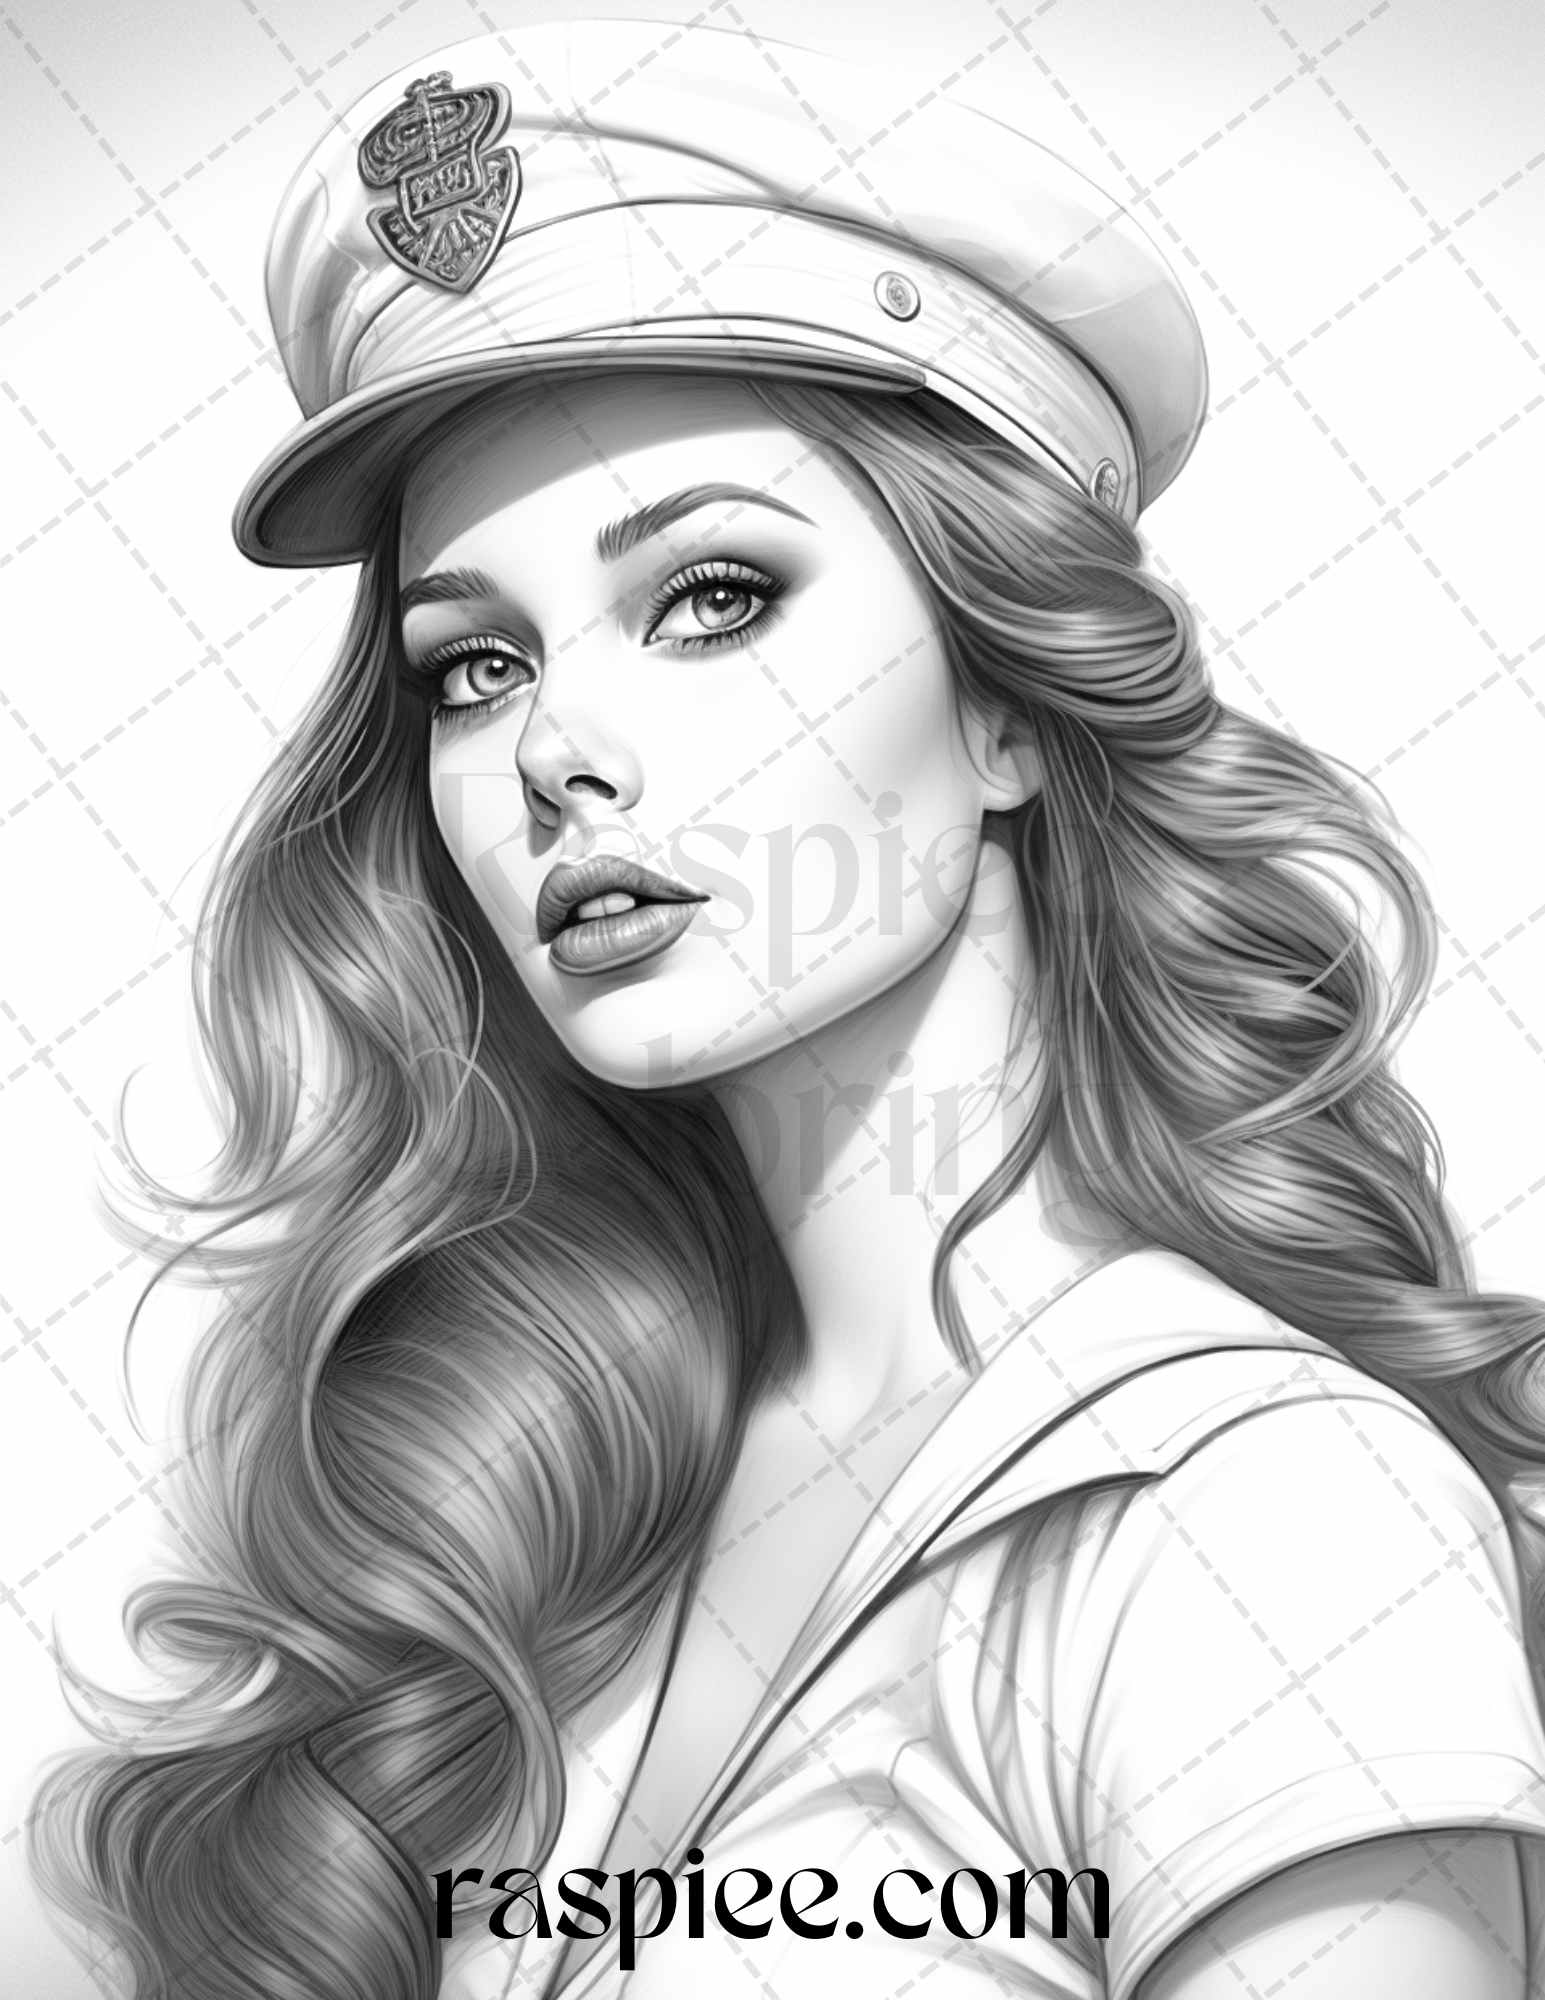 Sailor pin up girls grayscale coloring pages printable for adults â coloring